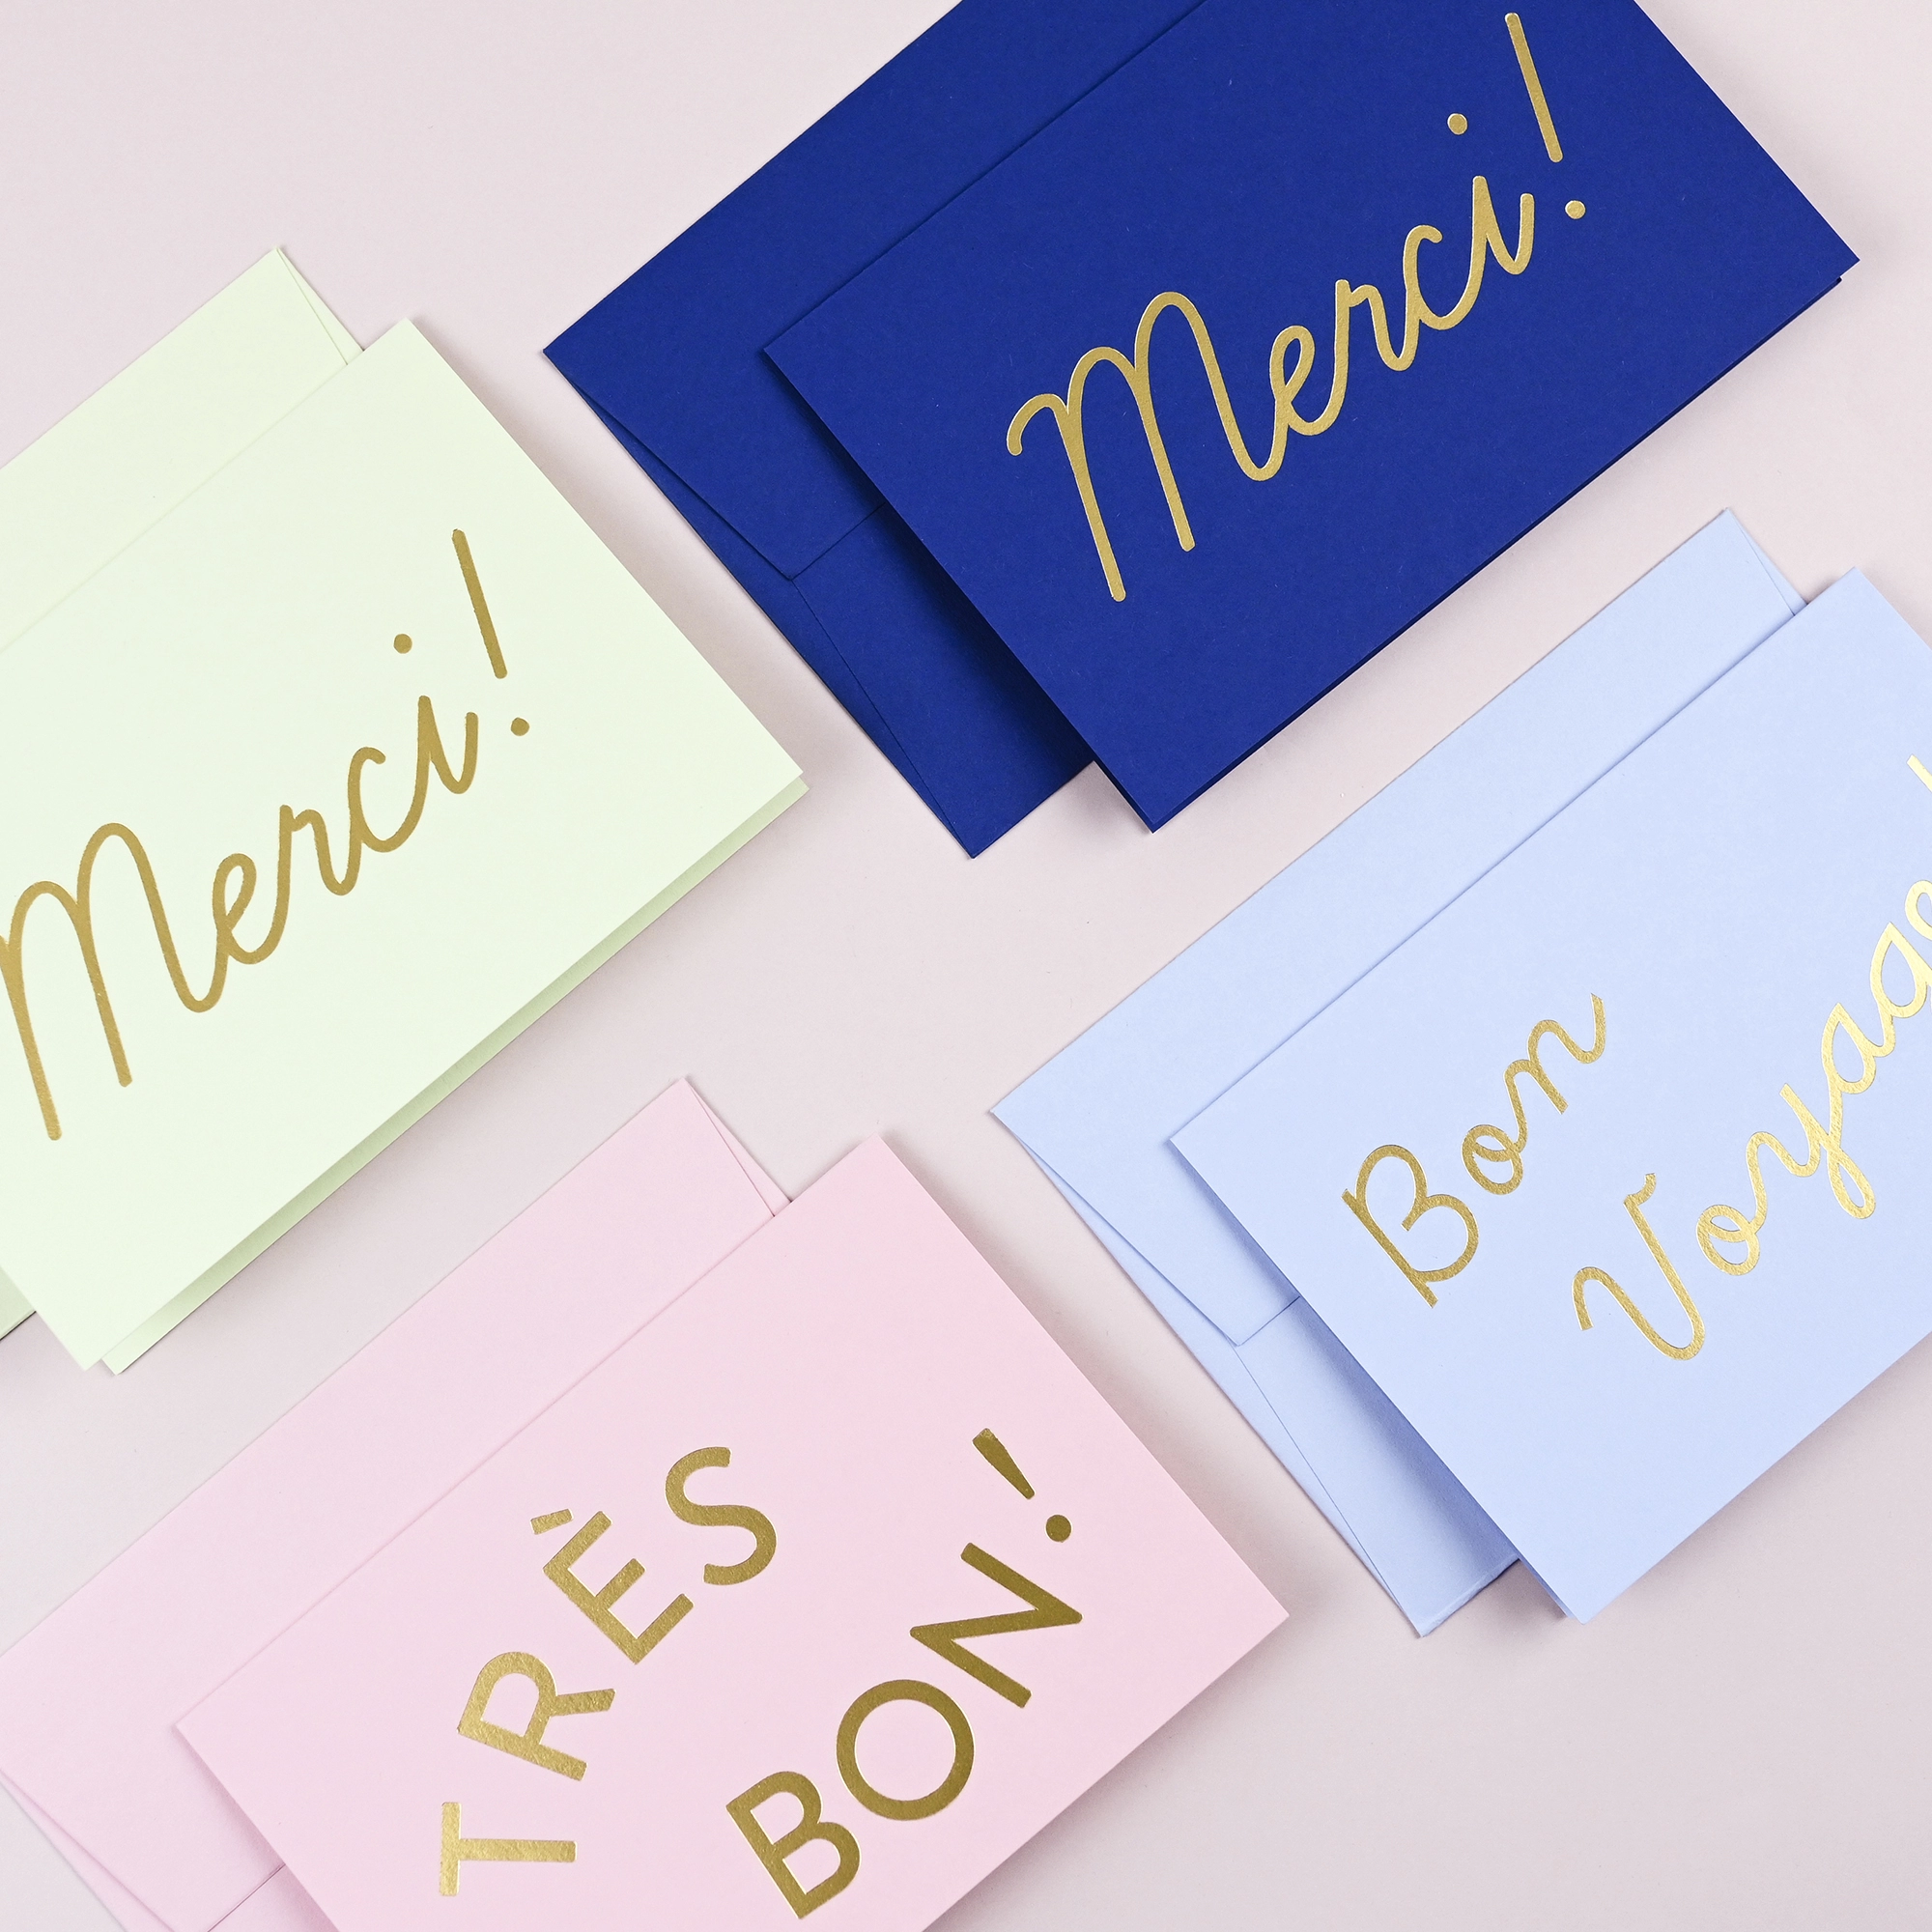 Luxury gold foiled greeting cards in pastel colours of pink, blue, navy and mint green on premium quality sustainable paper with heavyweight envelopes. 